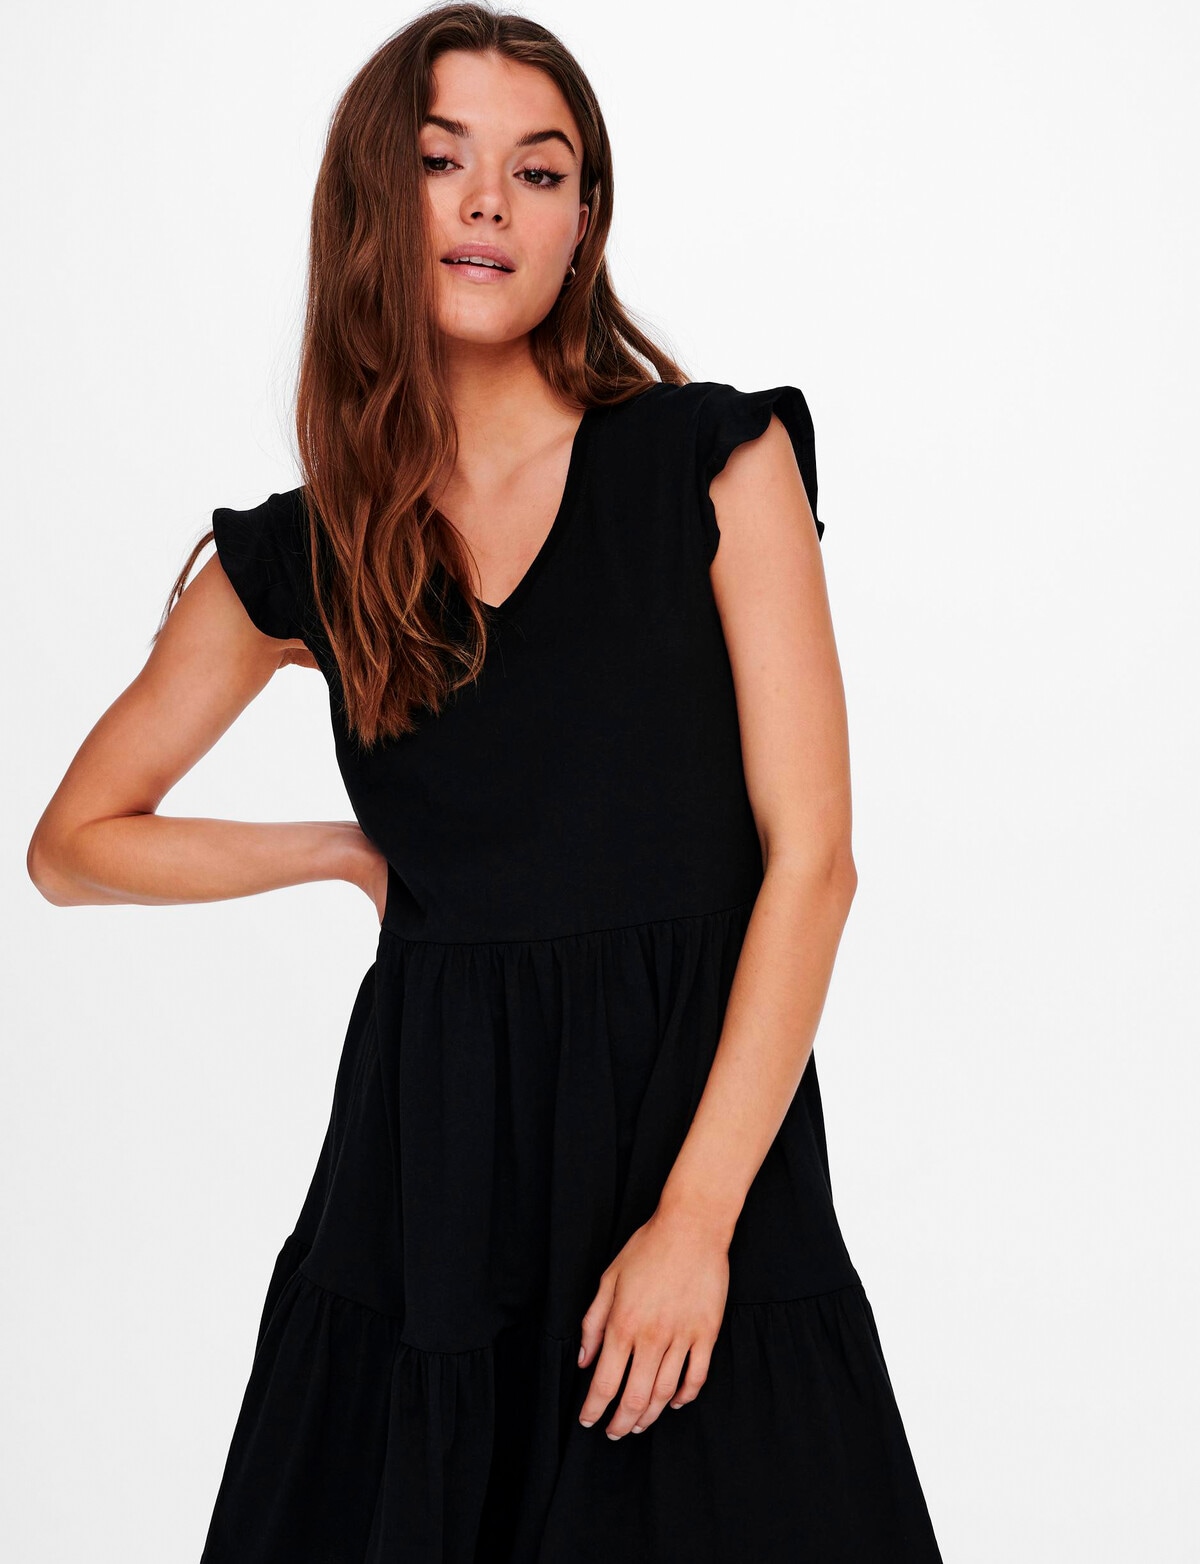 ONLY Frill Black Dresses Life Dress, Cap May Sleeve -